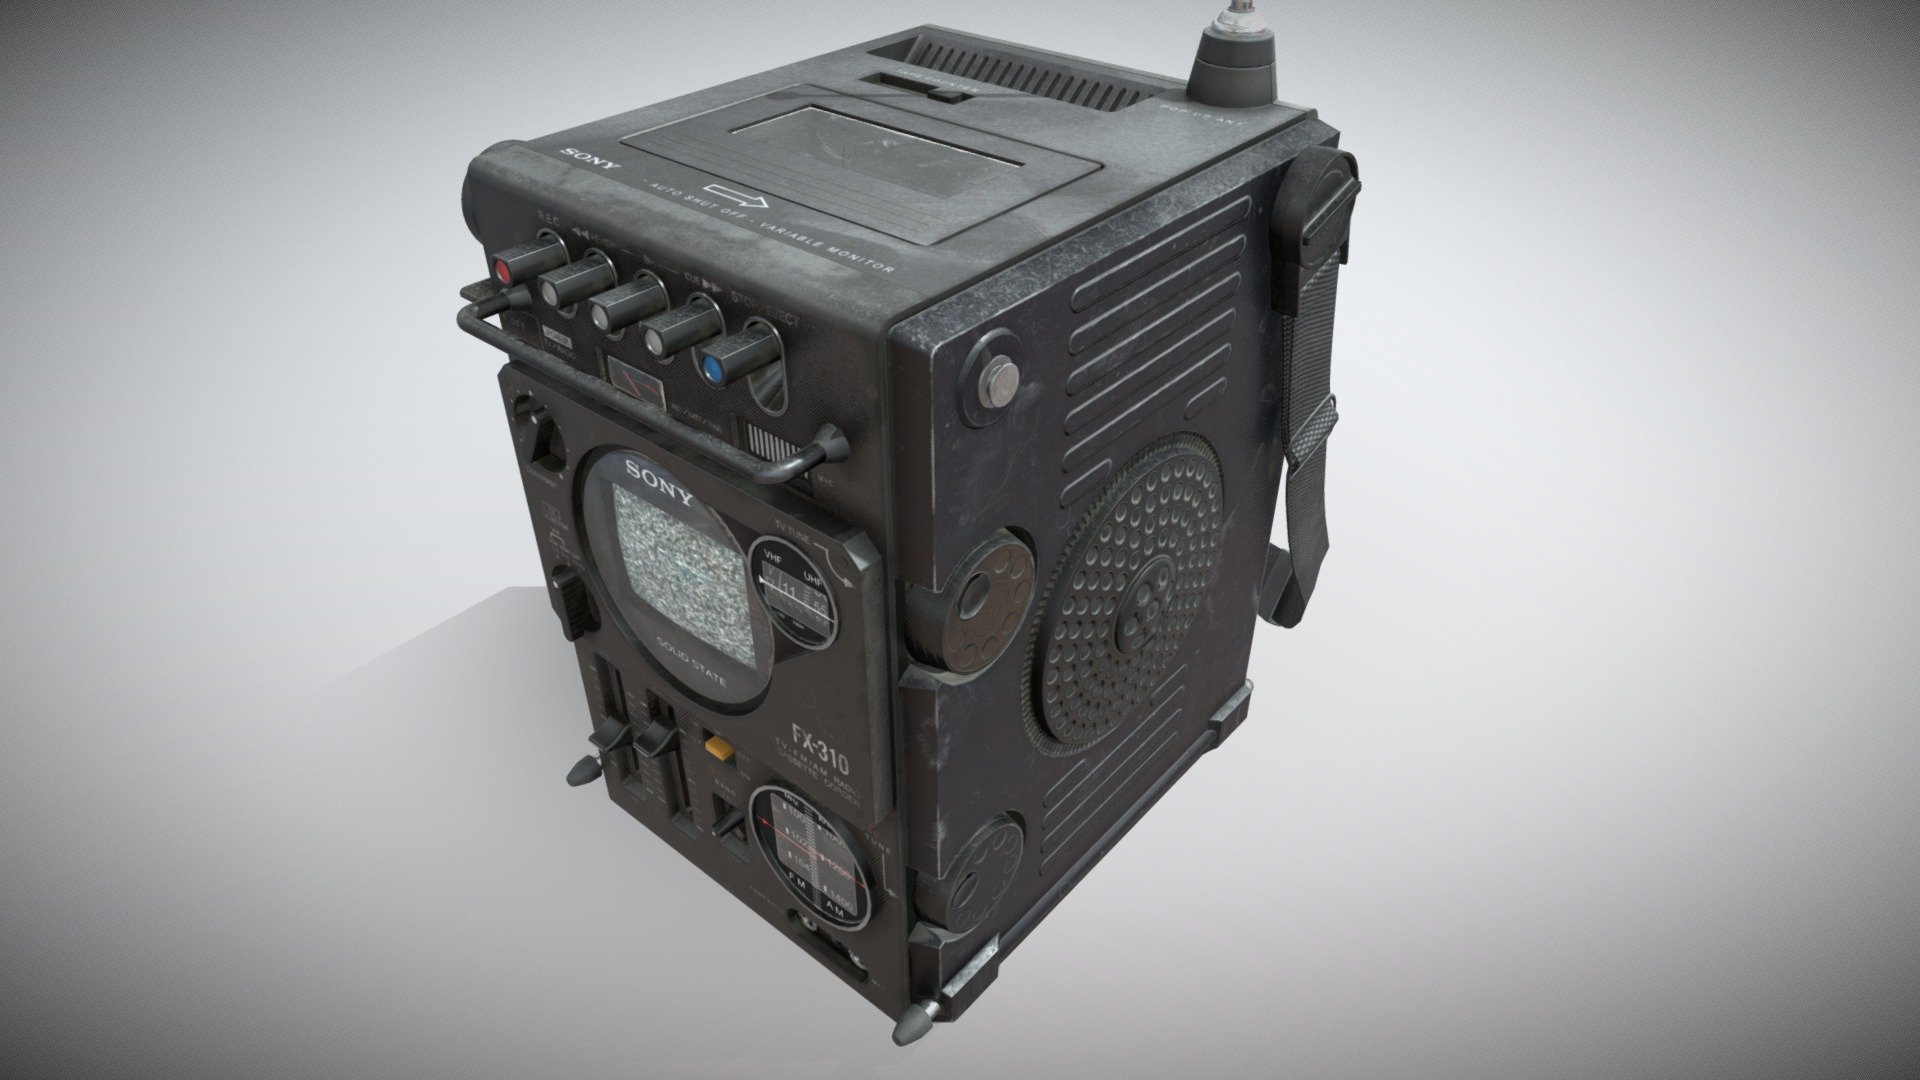 Old Sony FX-310 portable tv radio cassette recorder made in Maya, Substance painter and Photoshop 3d model